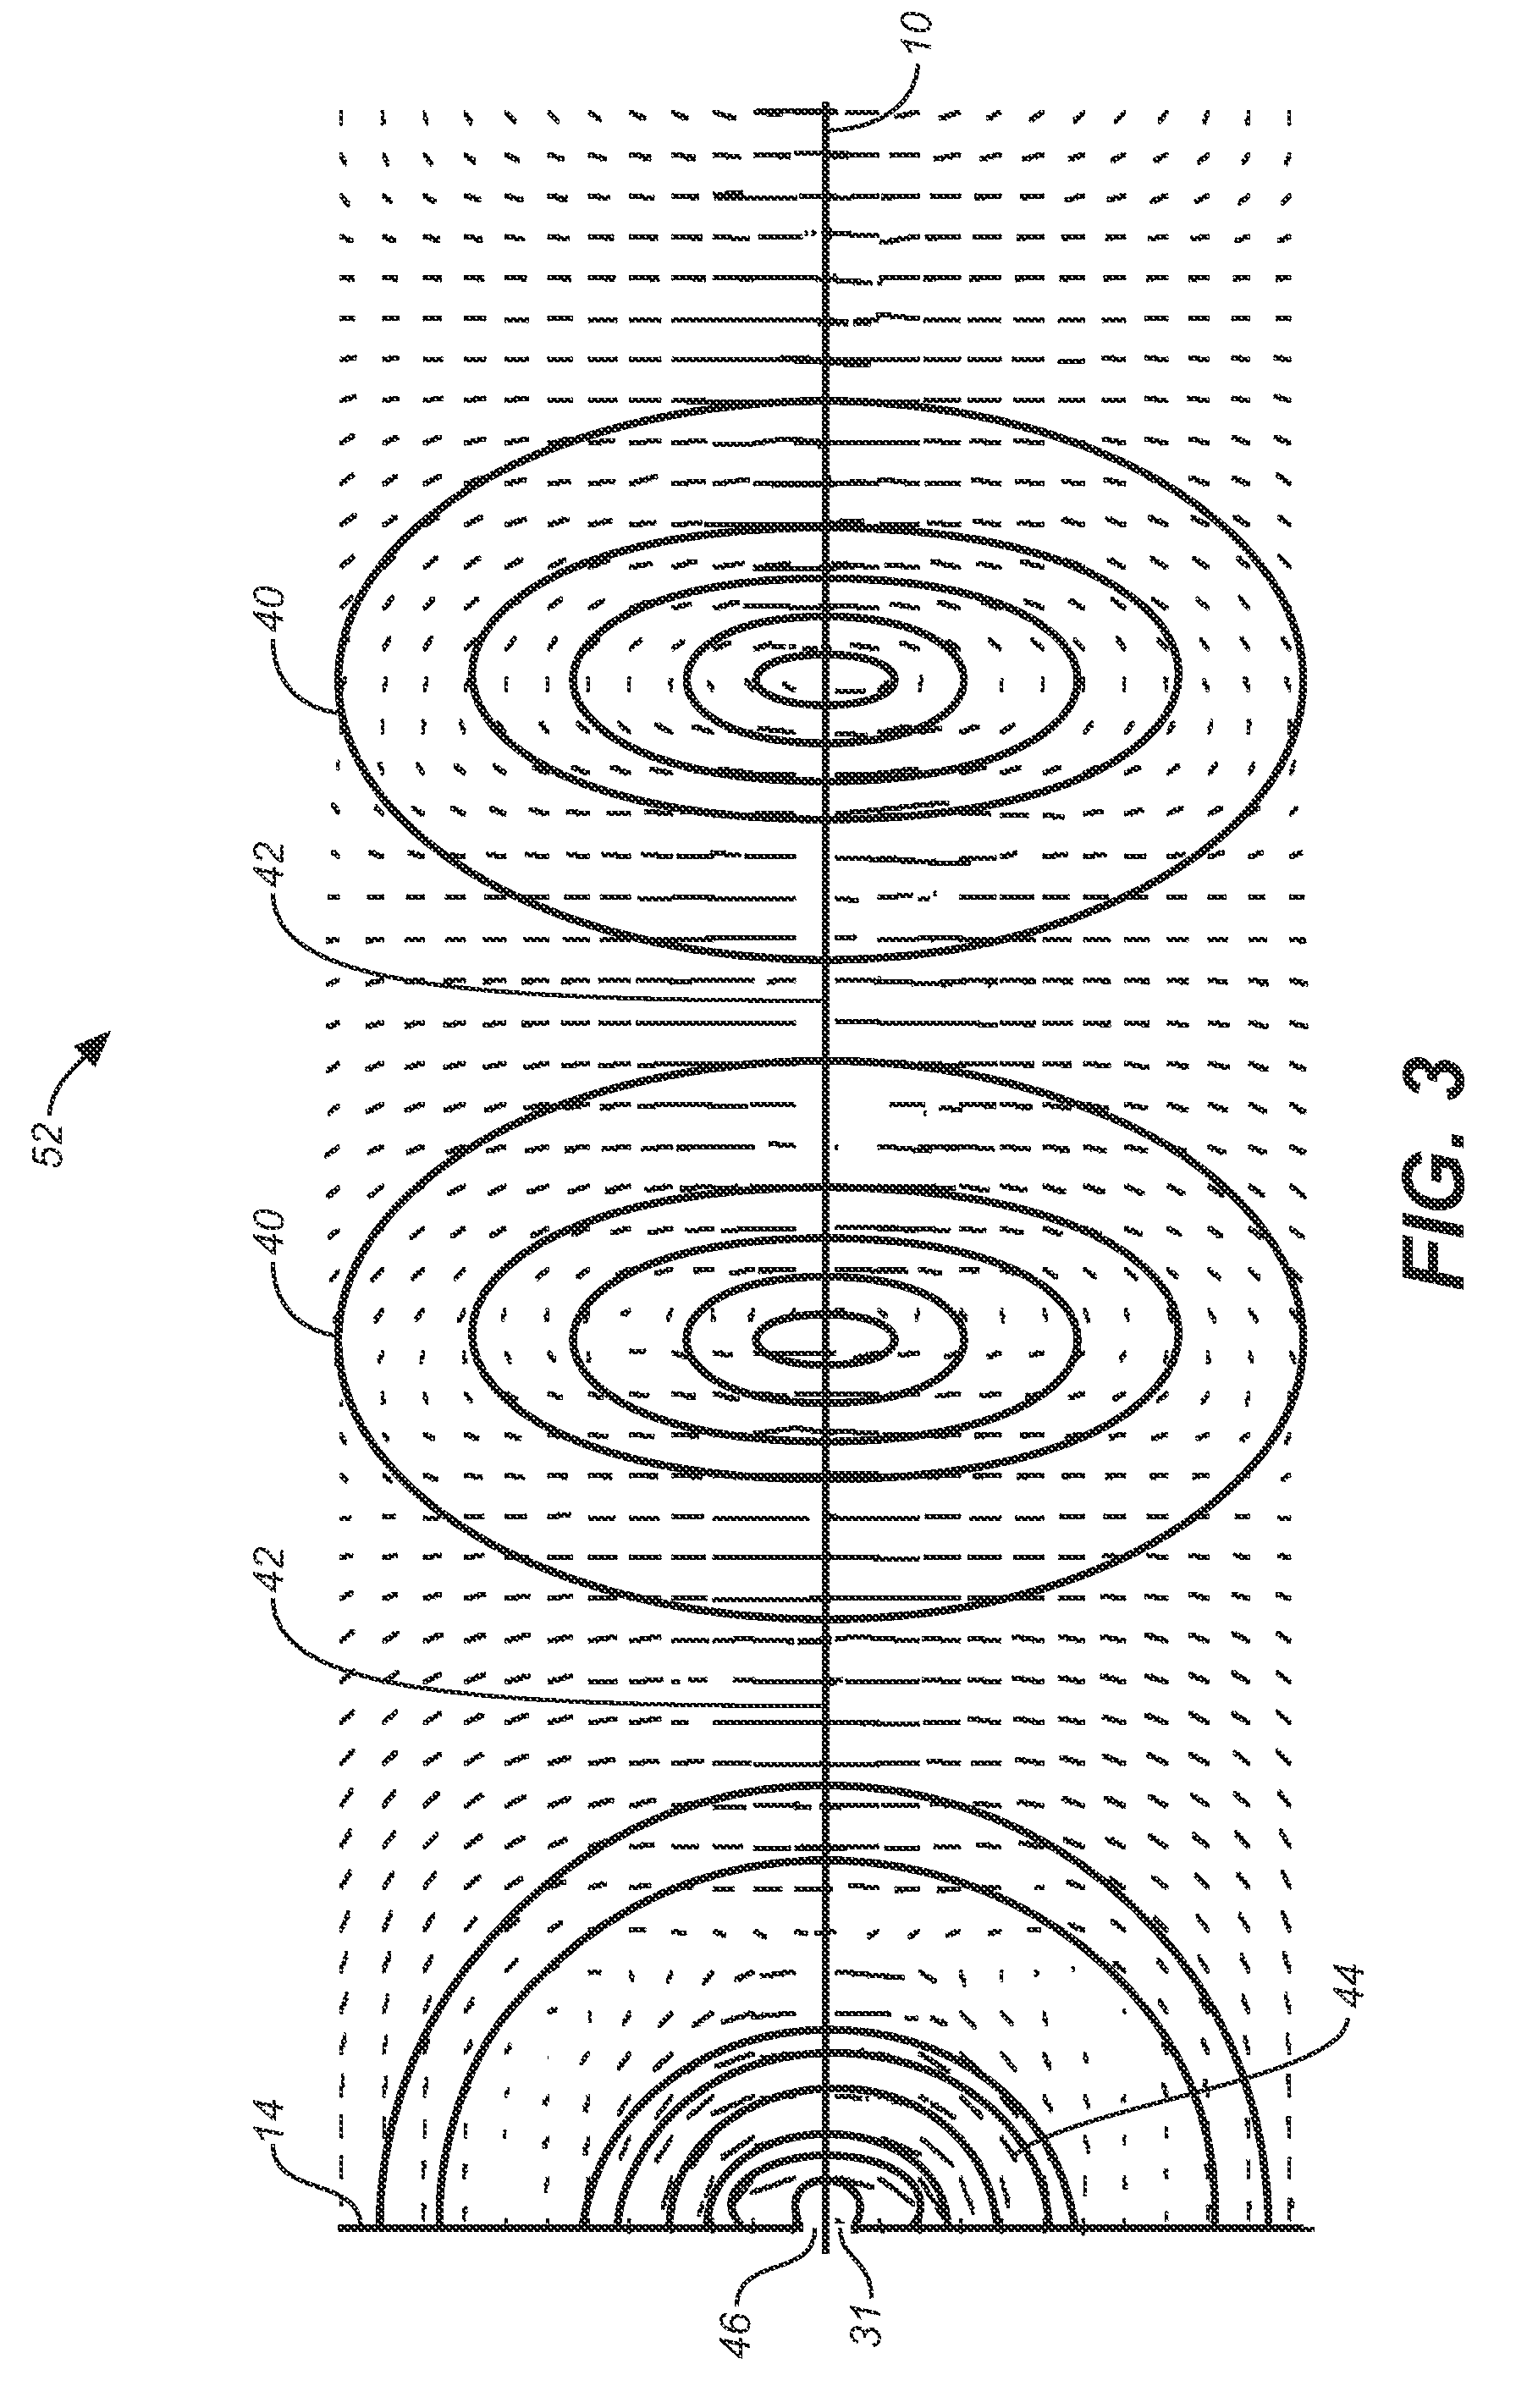 Surface wave transmission system over a single conductor having E-fields terminating along the conductor